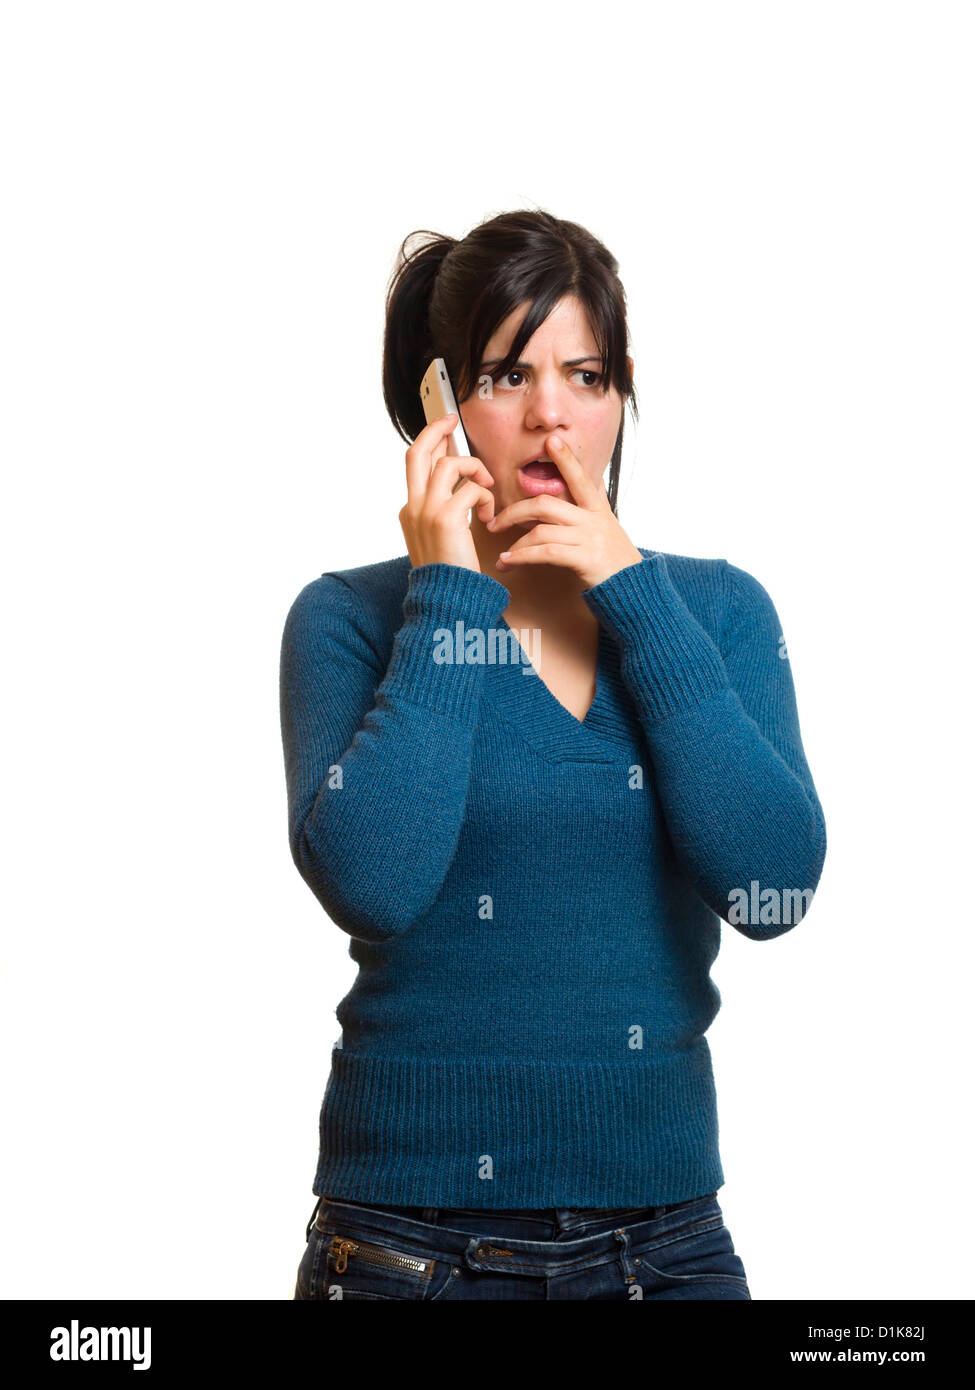 Worried young woman talking on mobile phone Stock Photo